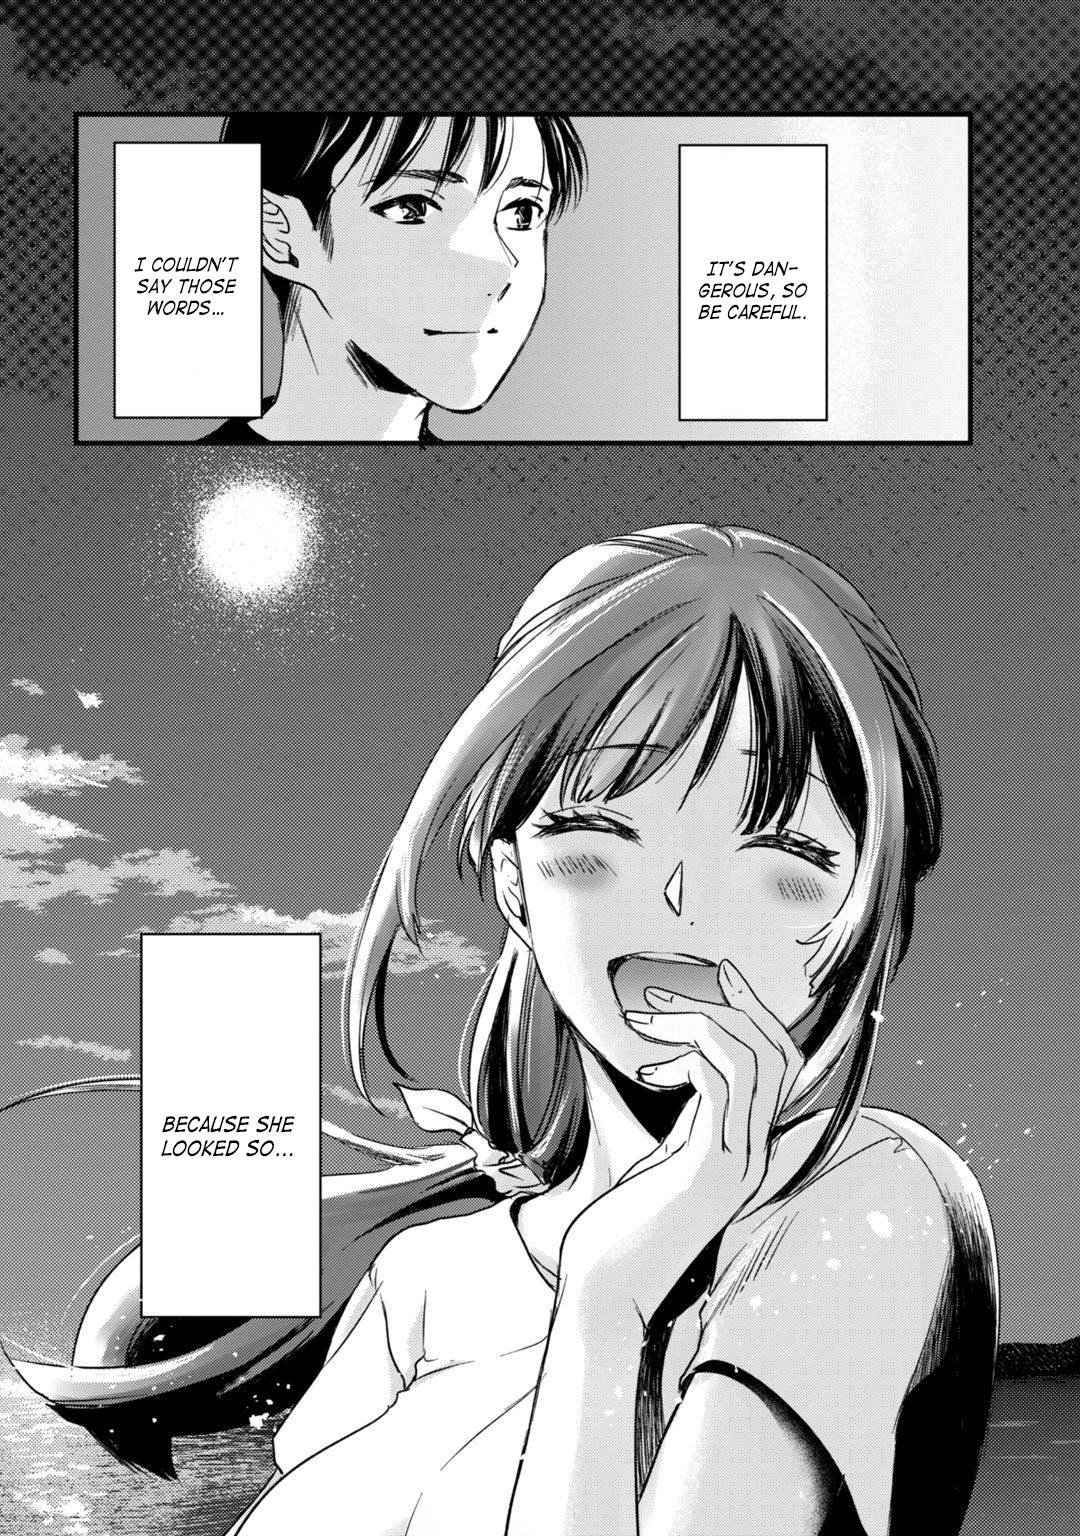 It's Fun Having a 300,000 Yen a Month Job Welcoming Home an Onee-san Who Doesn't Find Meaning in a Job That Pays Her 500,000 Yen a Month chapter 14 page 20